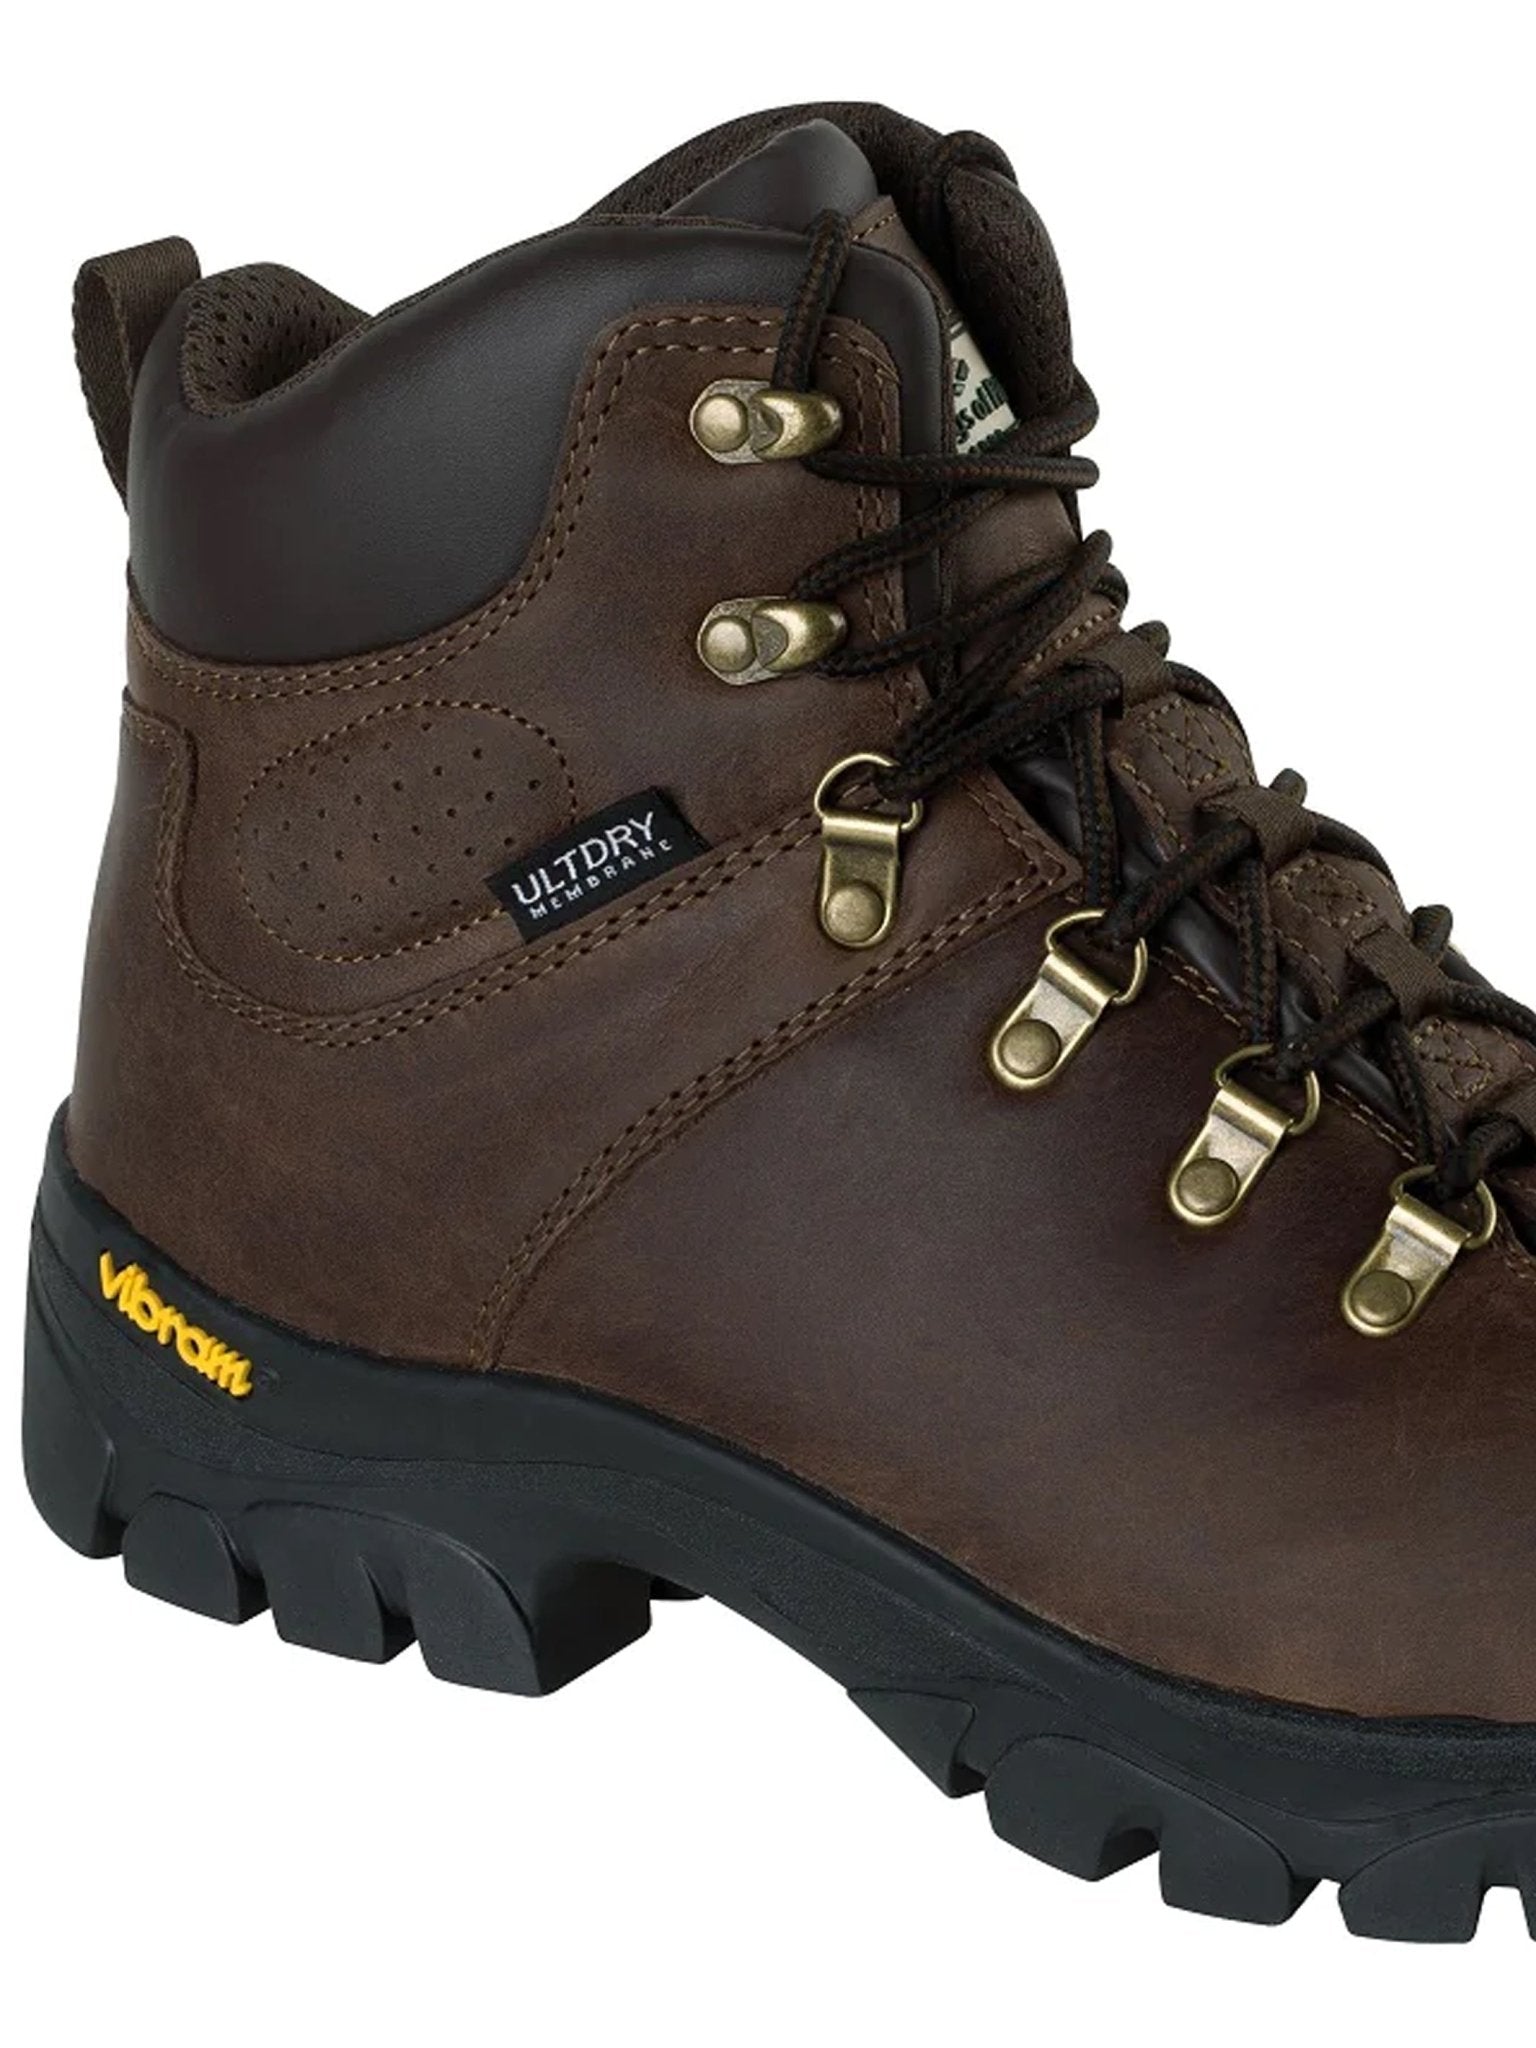 Hoggs of Fife Hoggs Of Fife - Waterproof Hiking / mens walking Boot - Munro Leather boot Boots